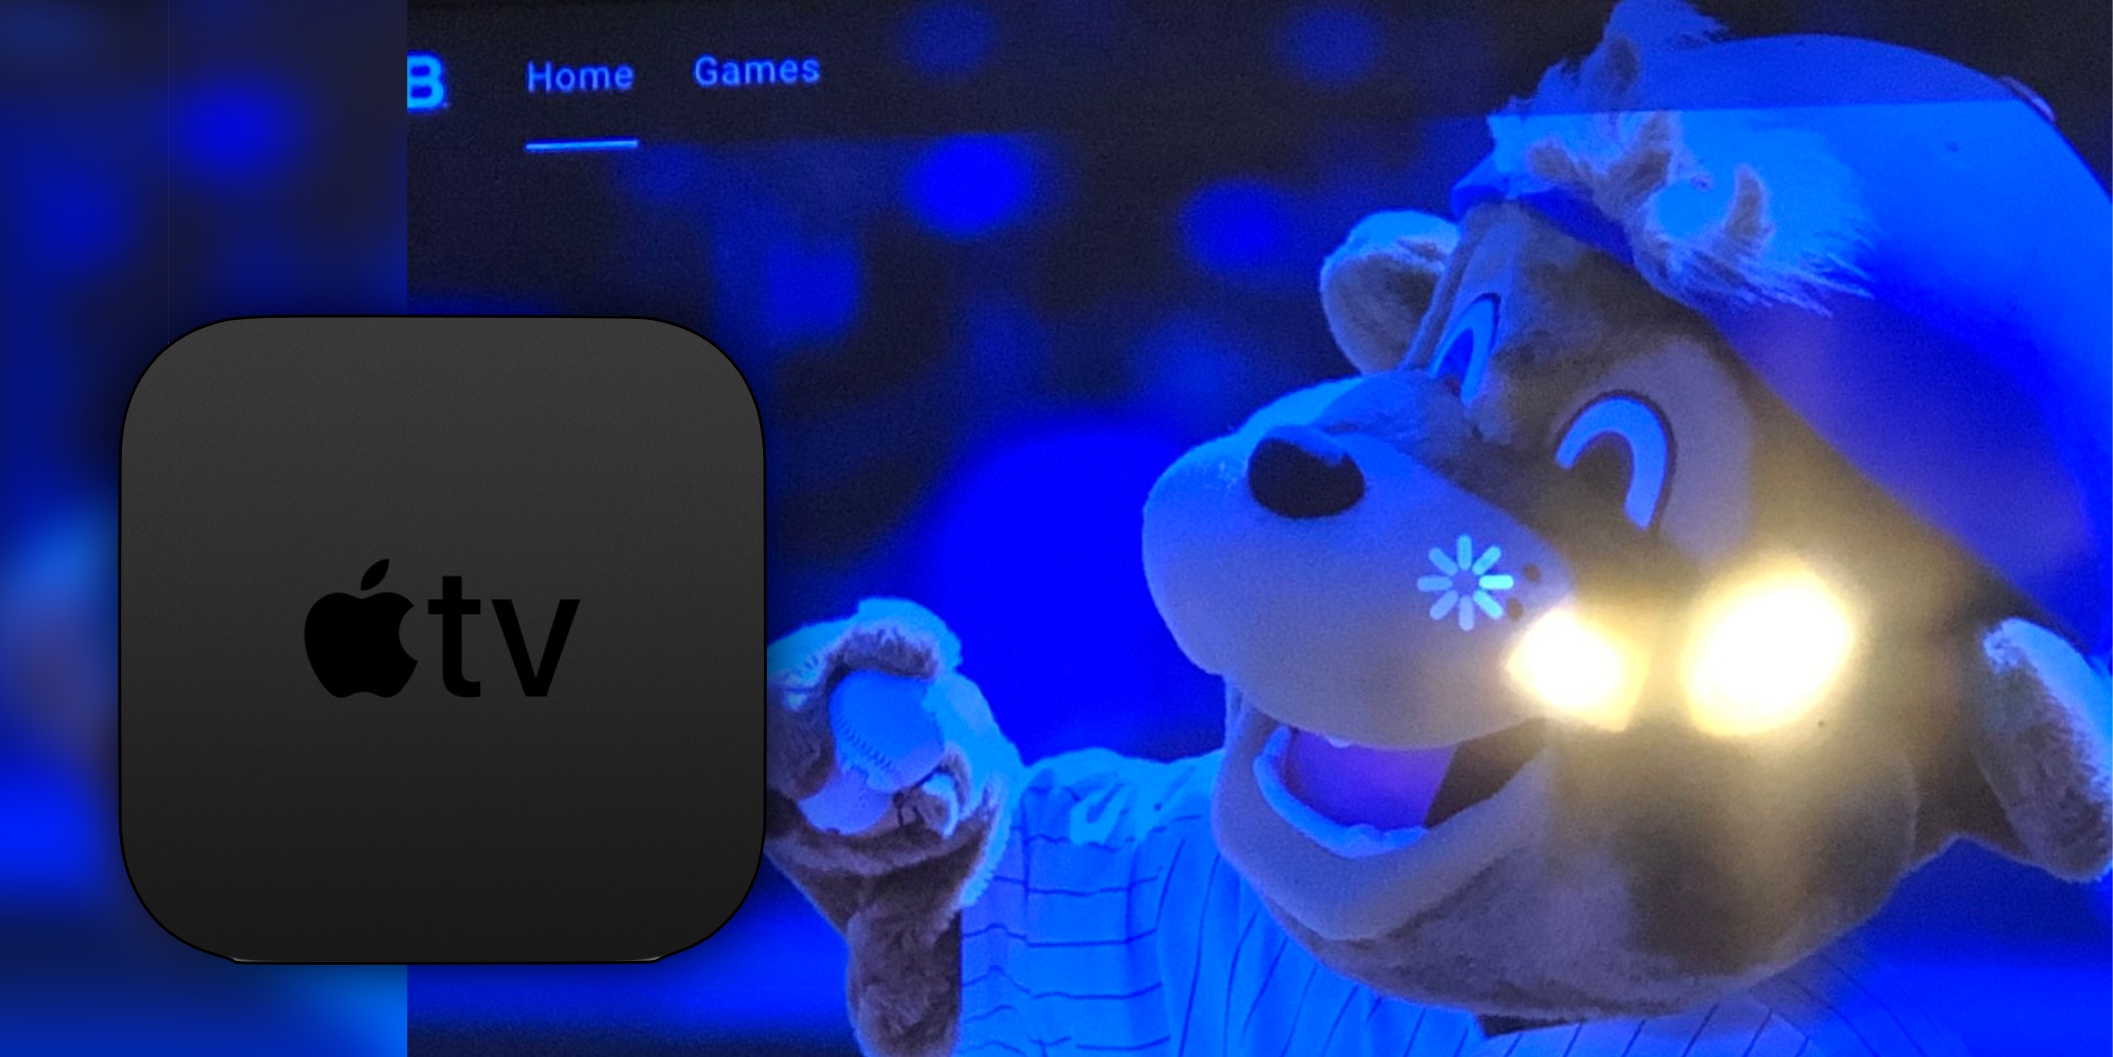 MLB app not working on Apple TV? Its not just you